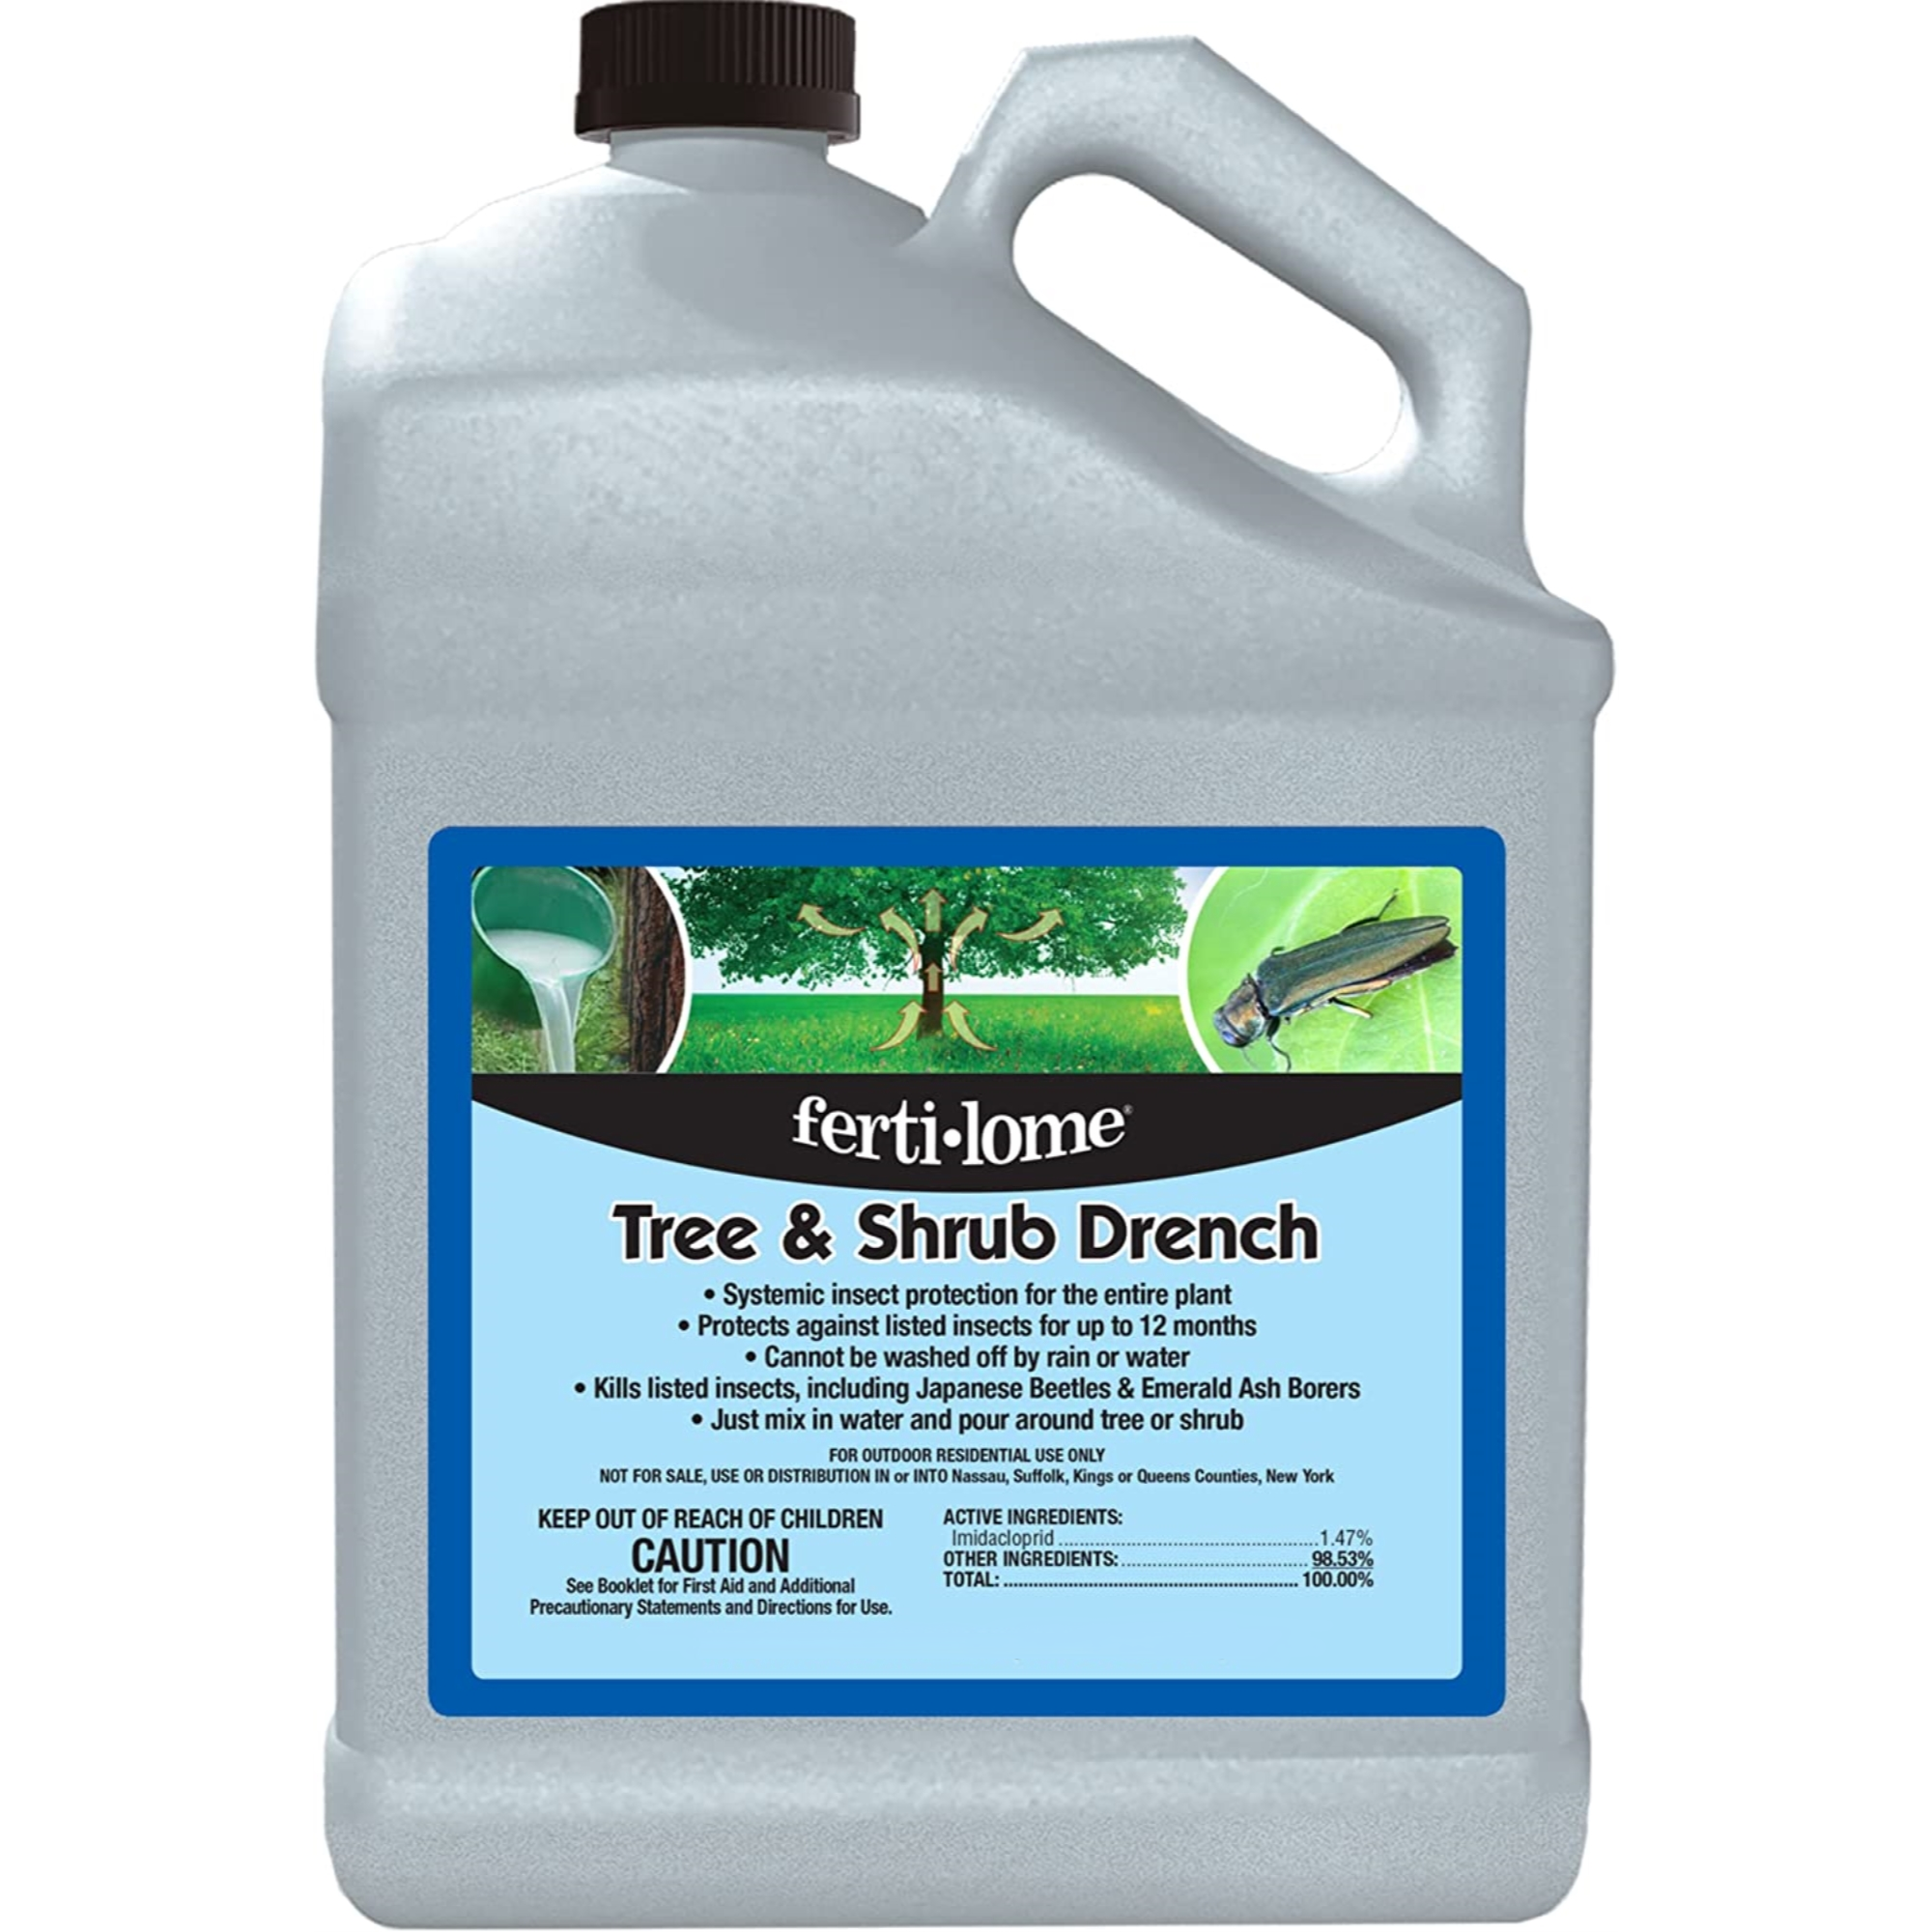 VPC Fertilome Tree & Shrub Drench Systemic Insect Protection